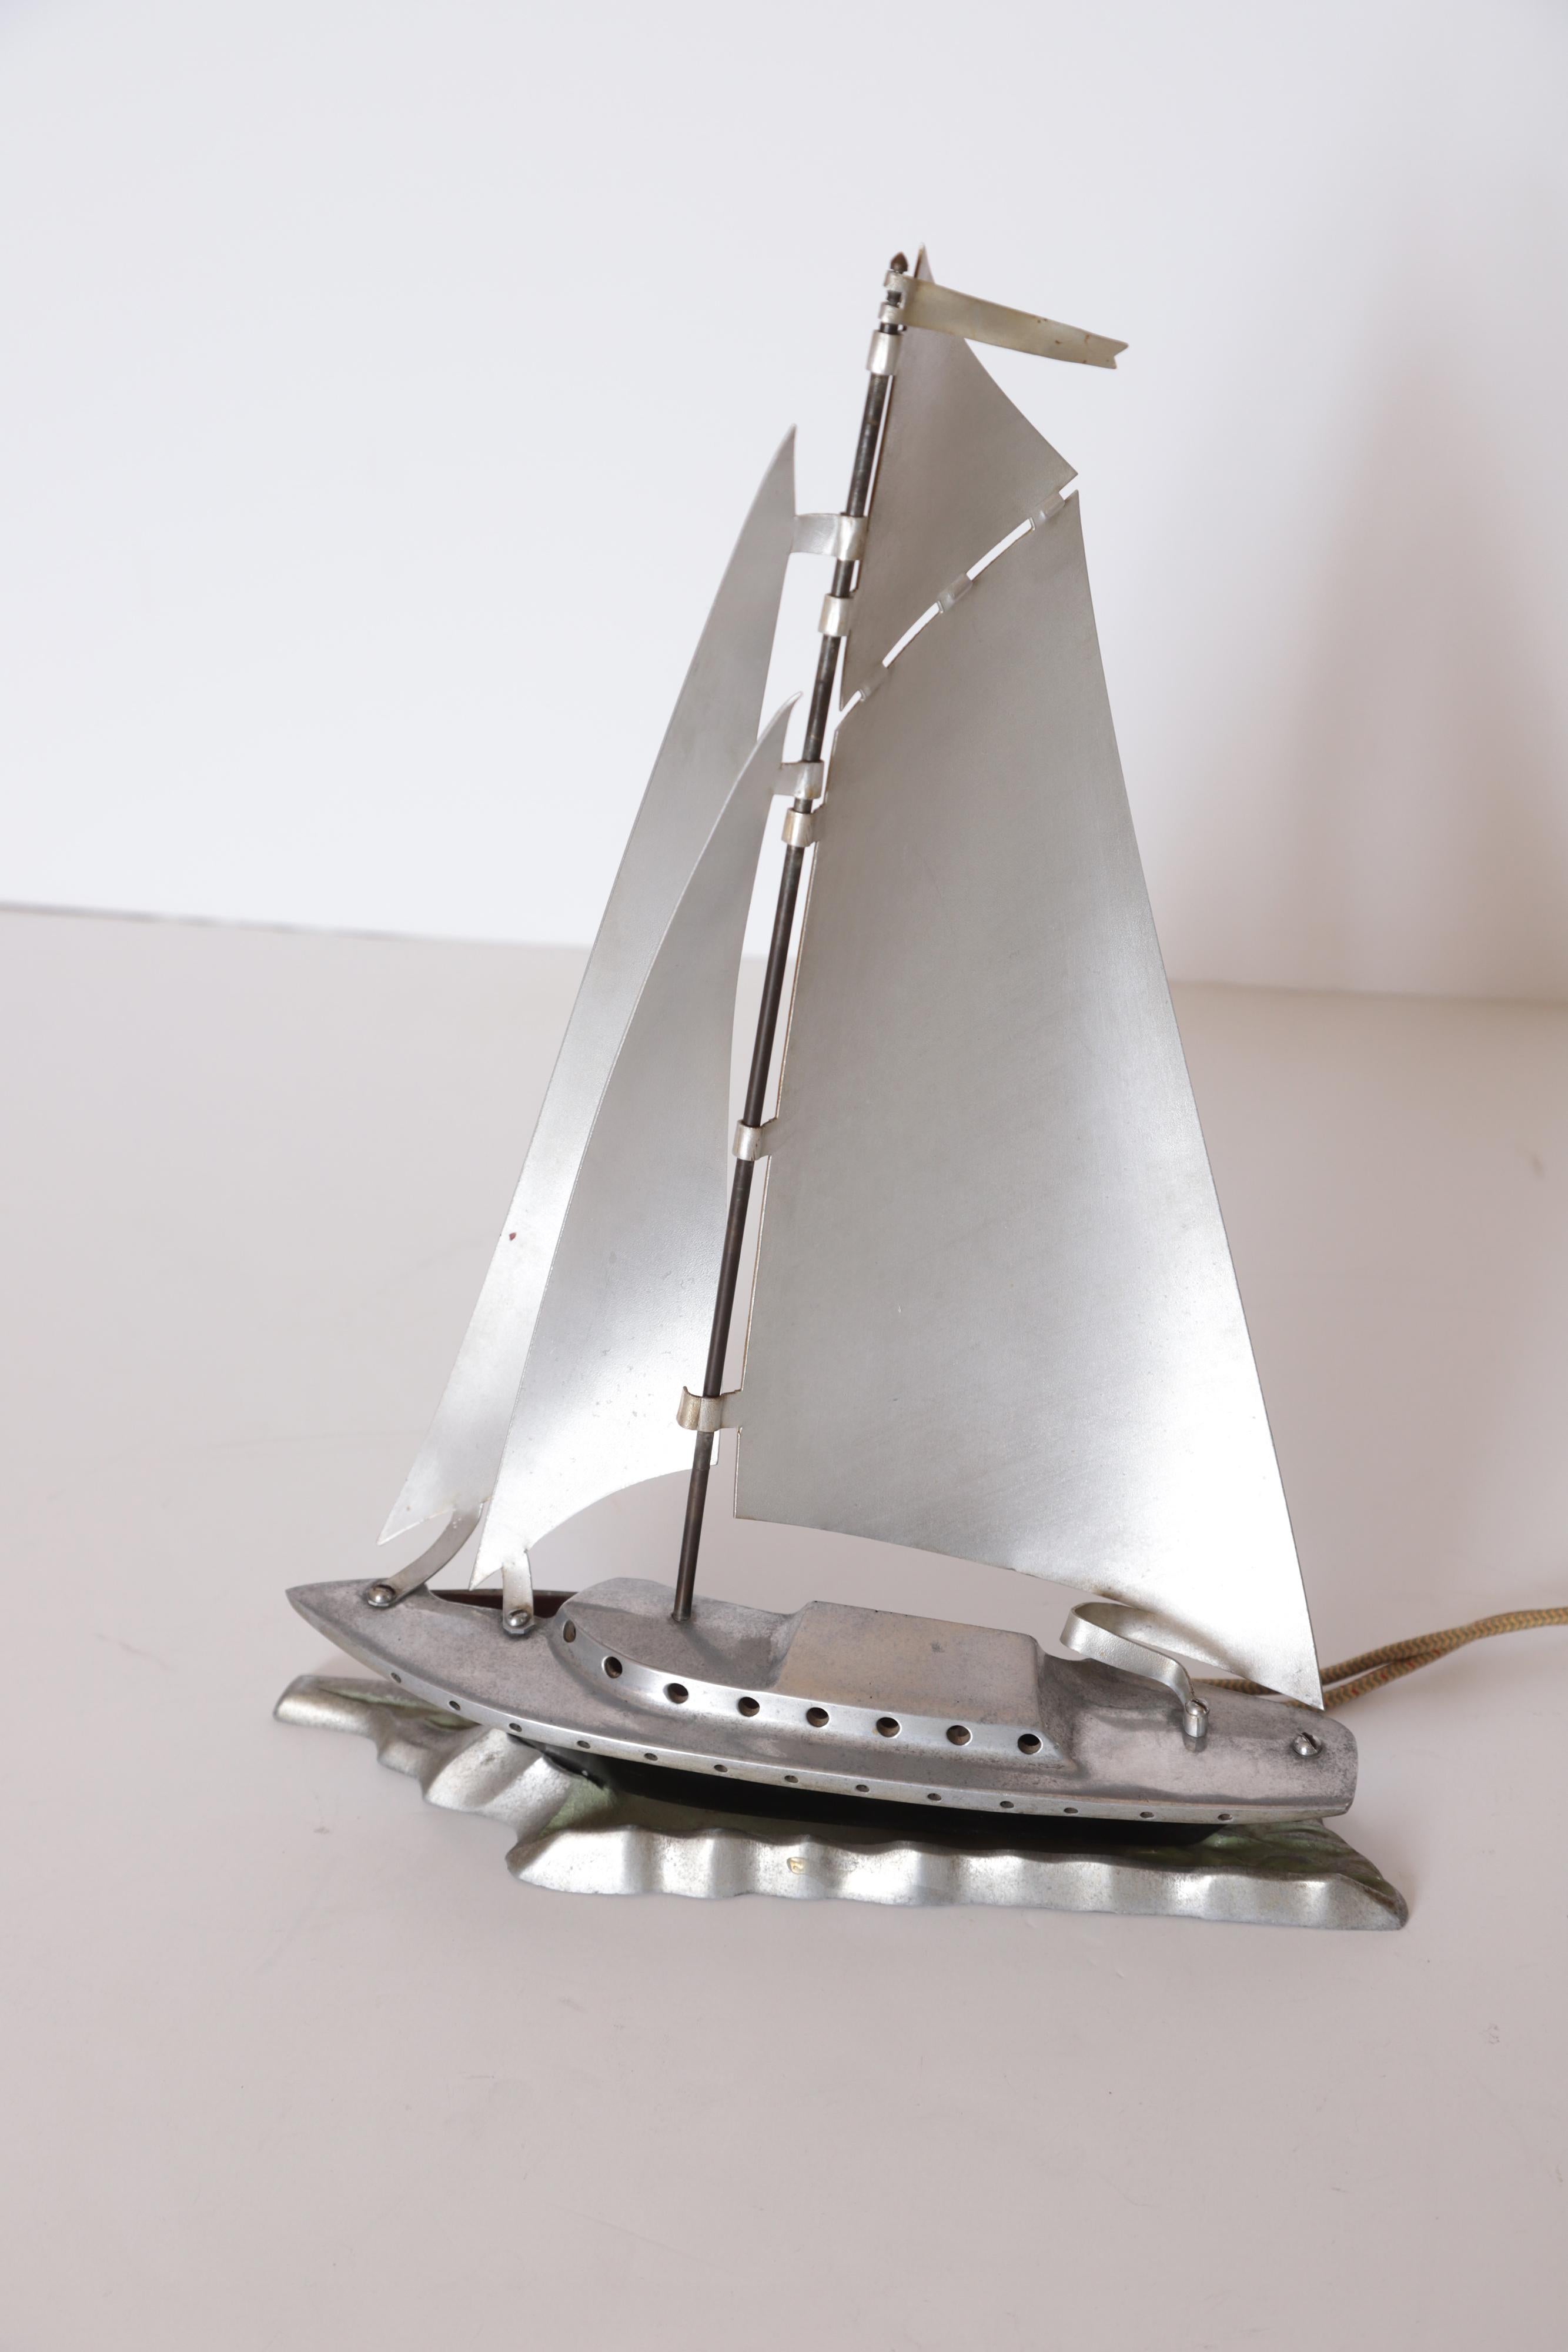 Machine Age Art Deco Streamline Aluminum Sailboat Night Light / Mood Lamp    Table Lamp  Boat Ship

Vintage Aluminum Sailing Vessel Decorative Lamp ca 1930's.
One-piece cast aluminum deck & cabin, with attached silver anodized aluminum sails.